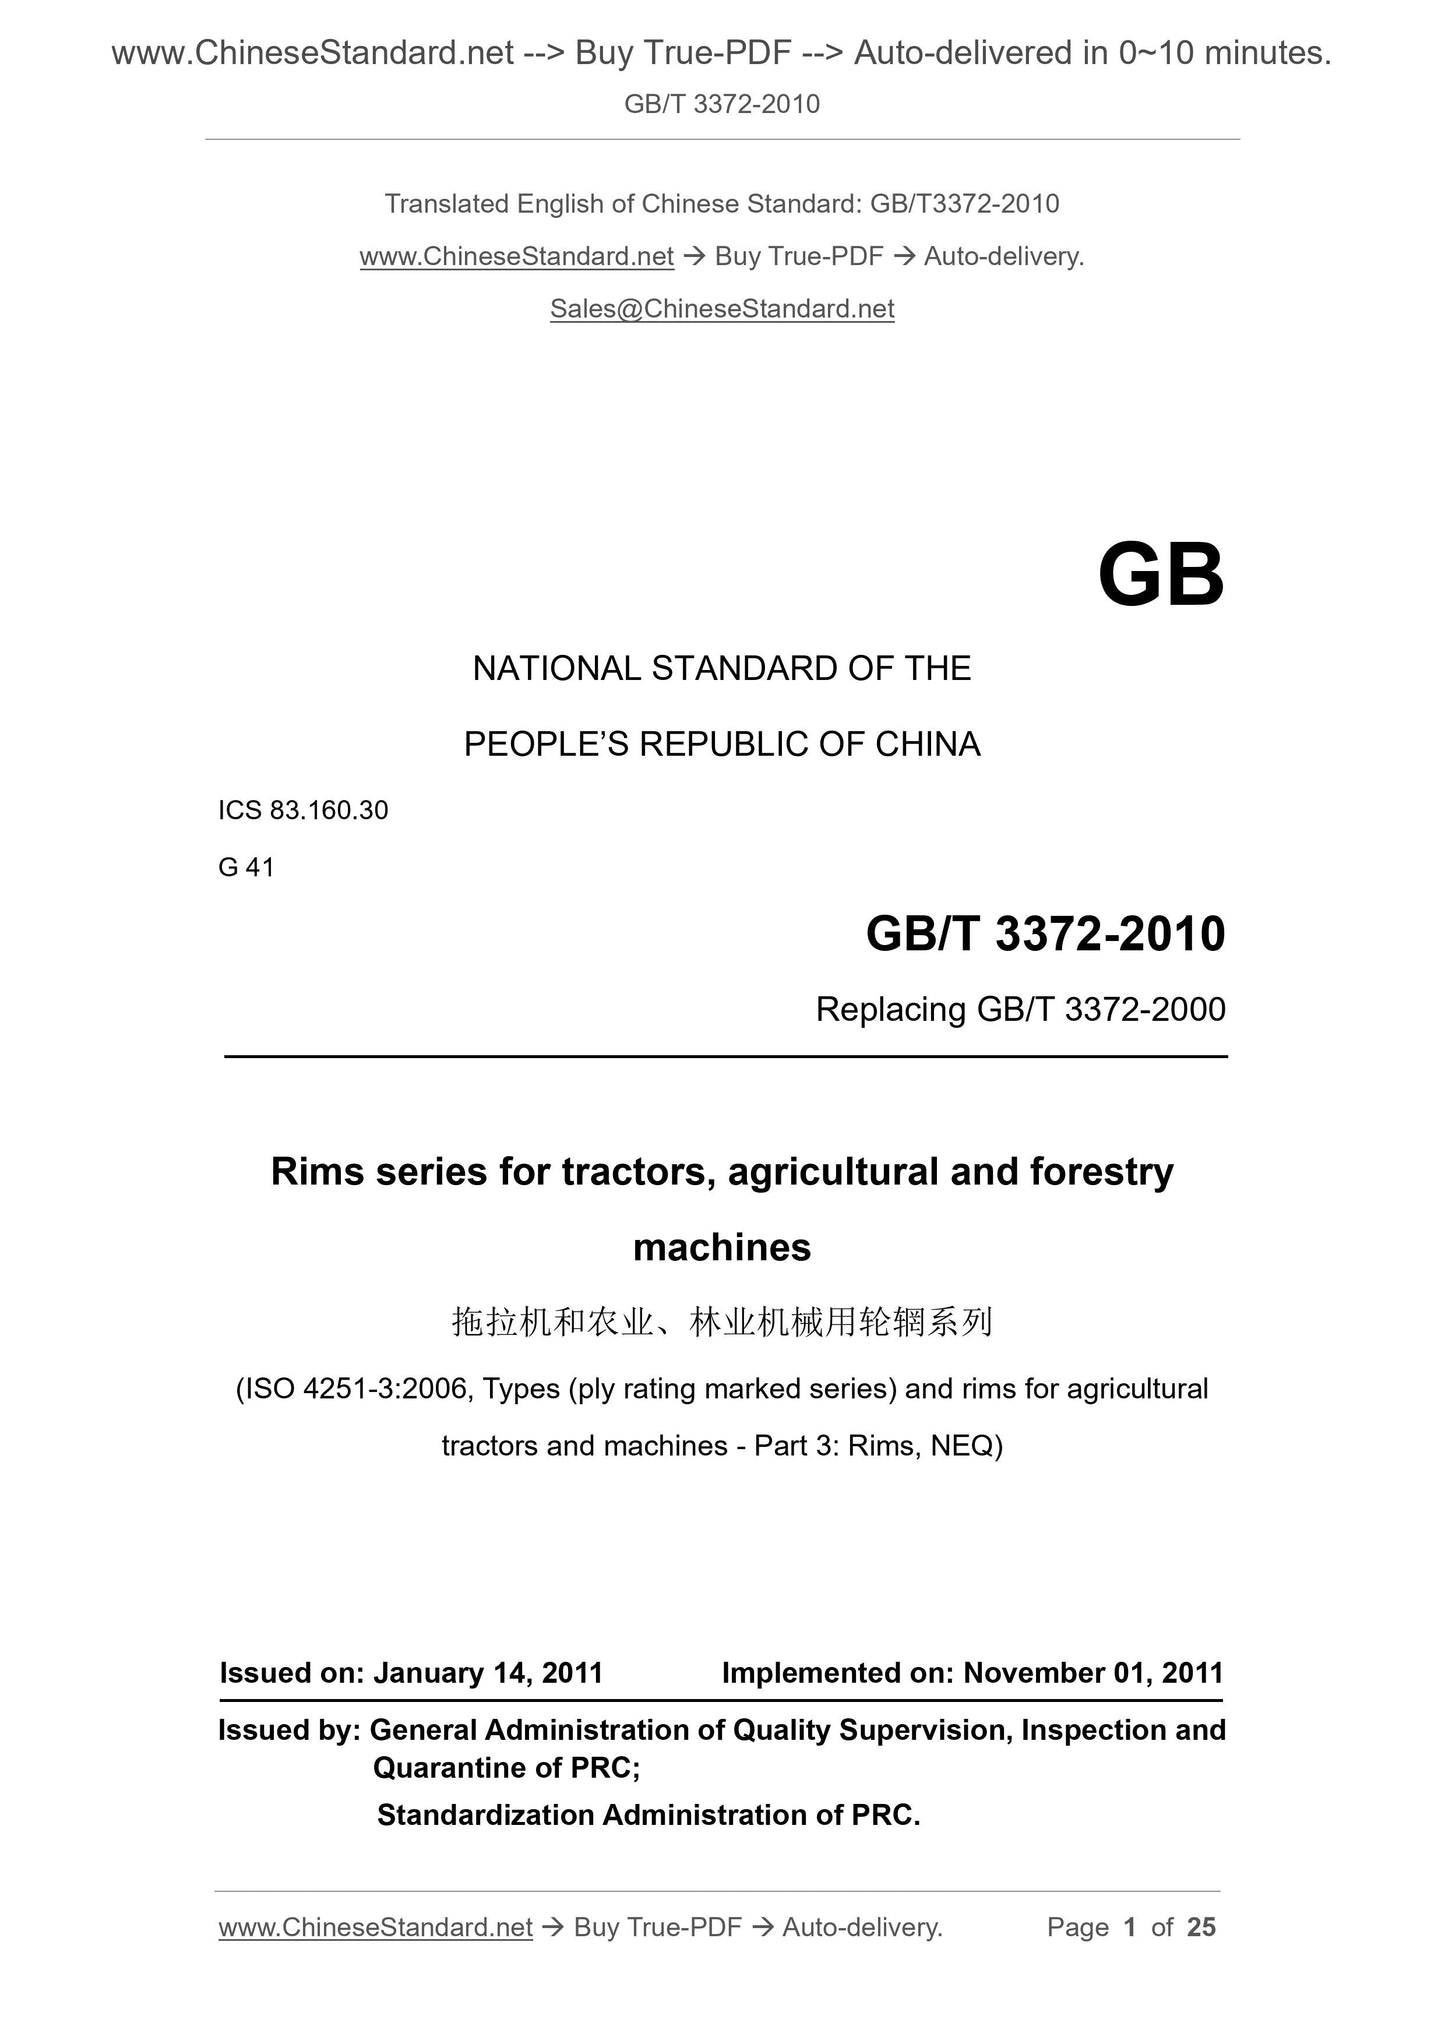 GB/T 3372-2010 Page 1